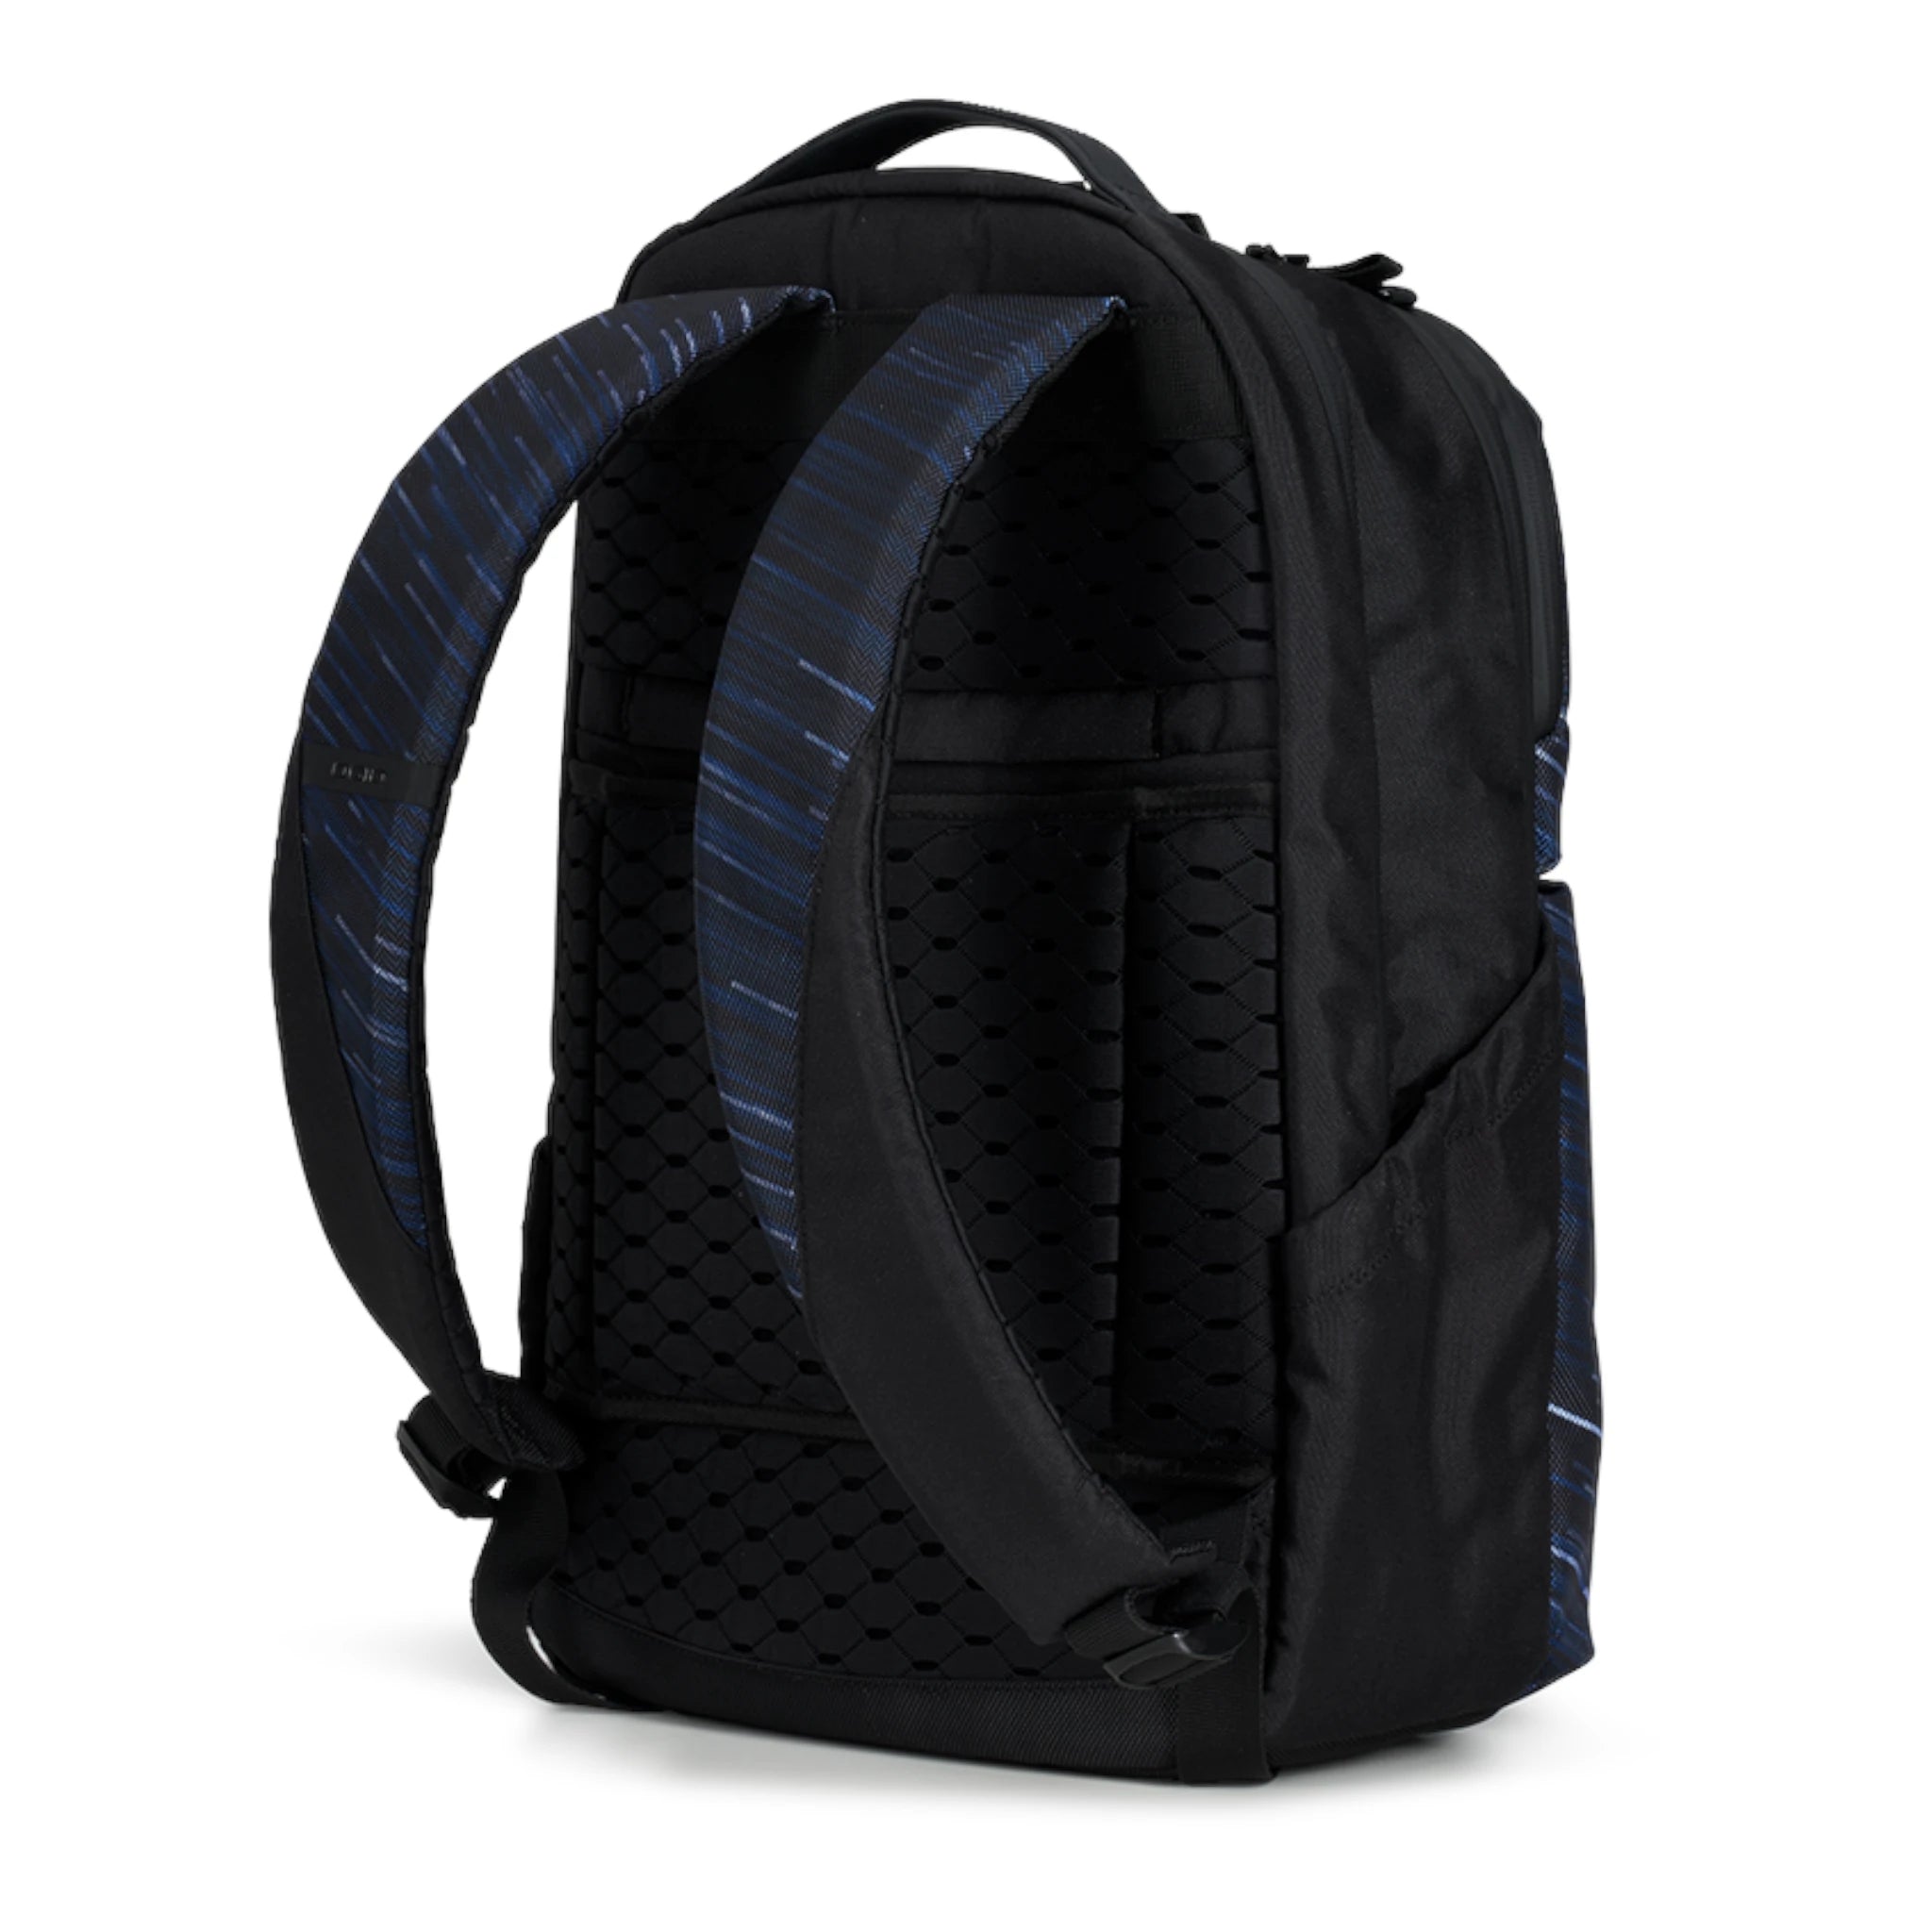 PACE PRO LIMITED EDITION 20L BACKPACK